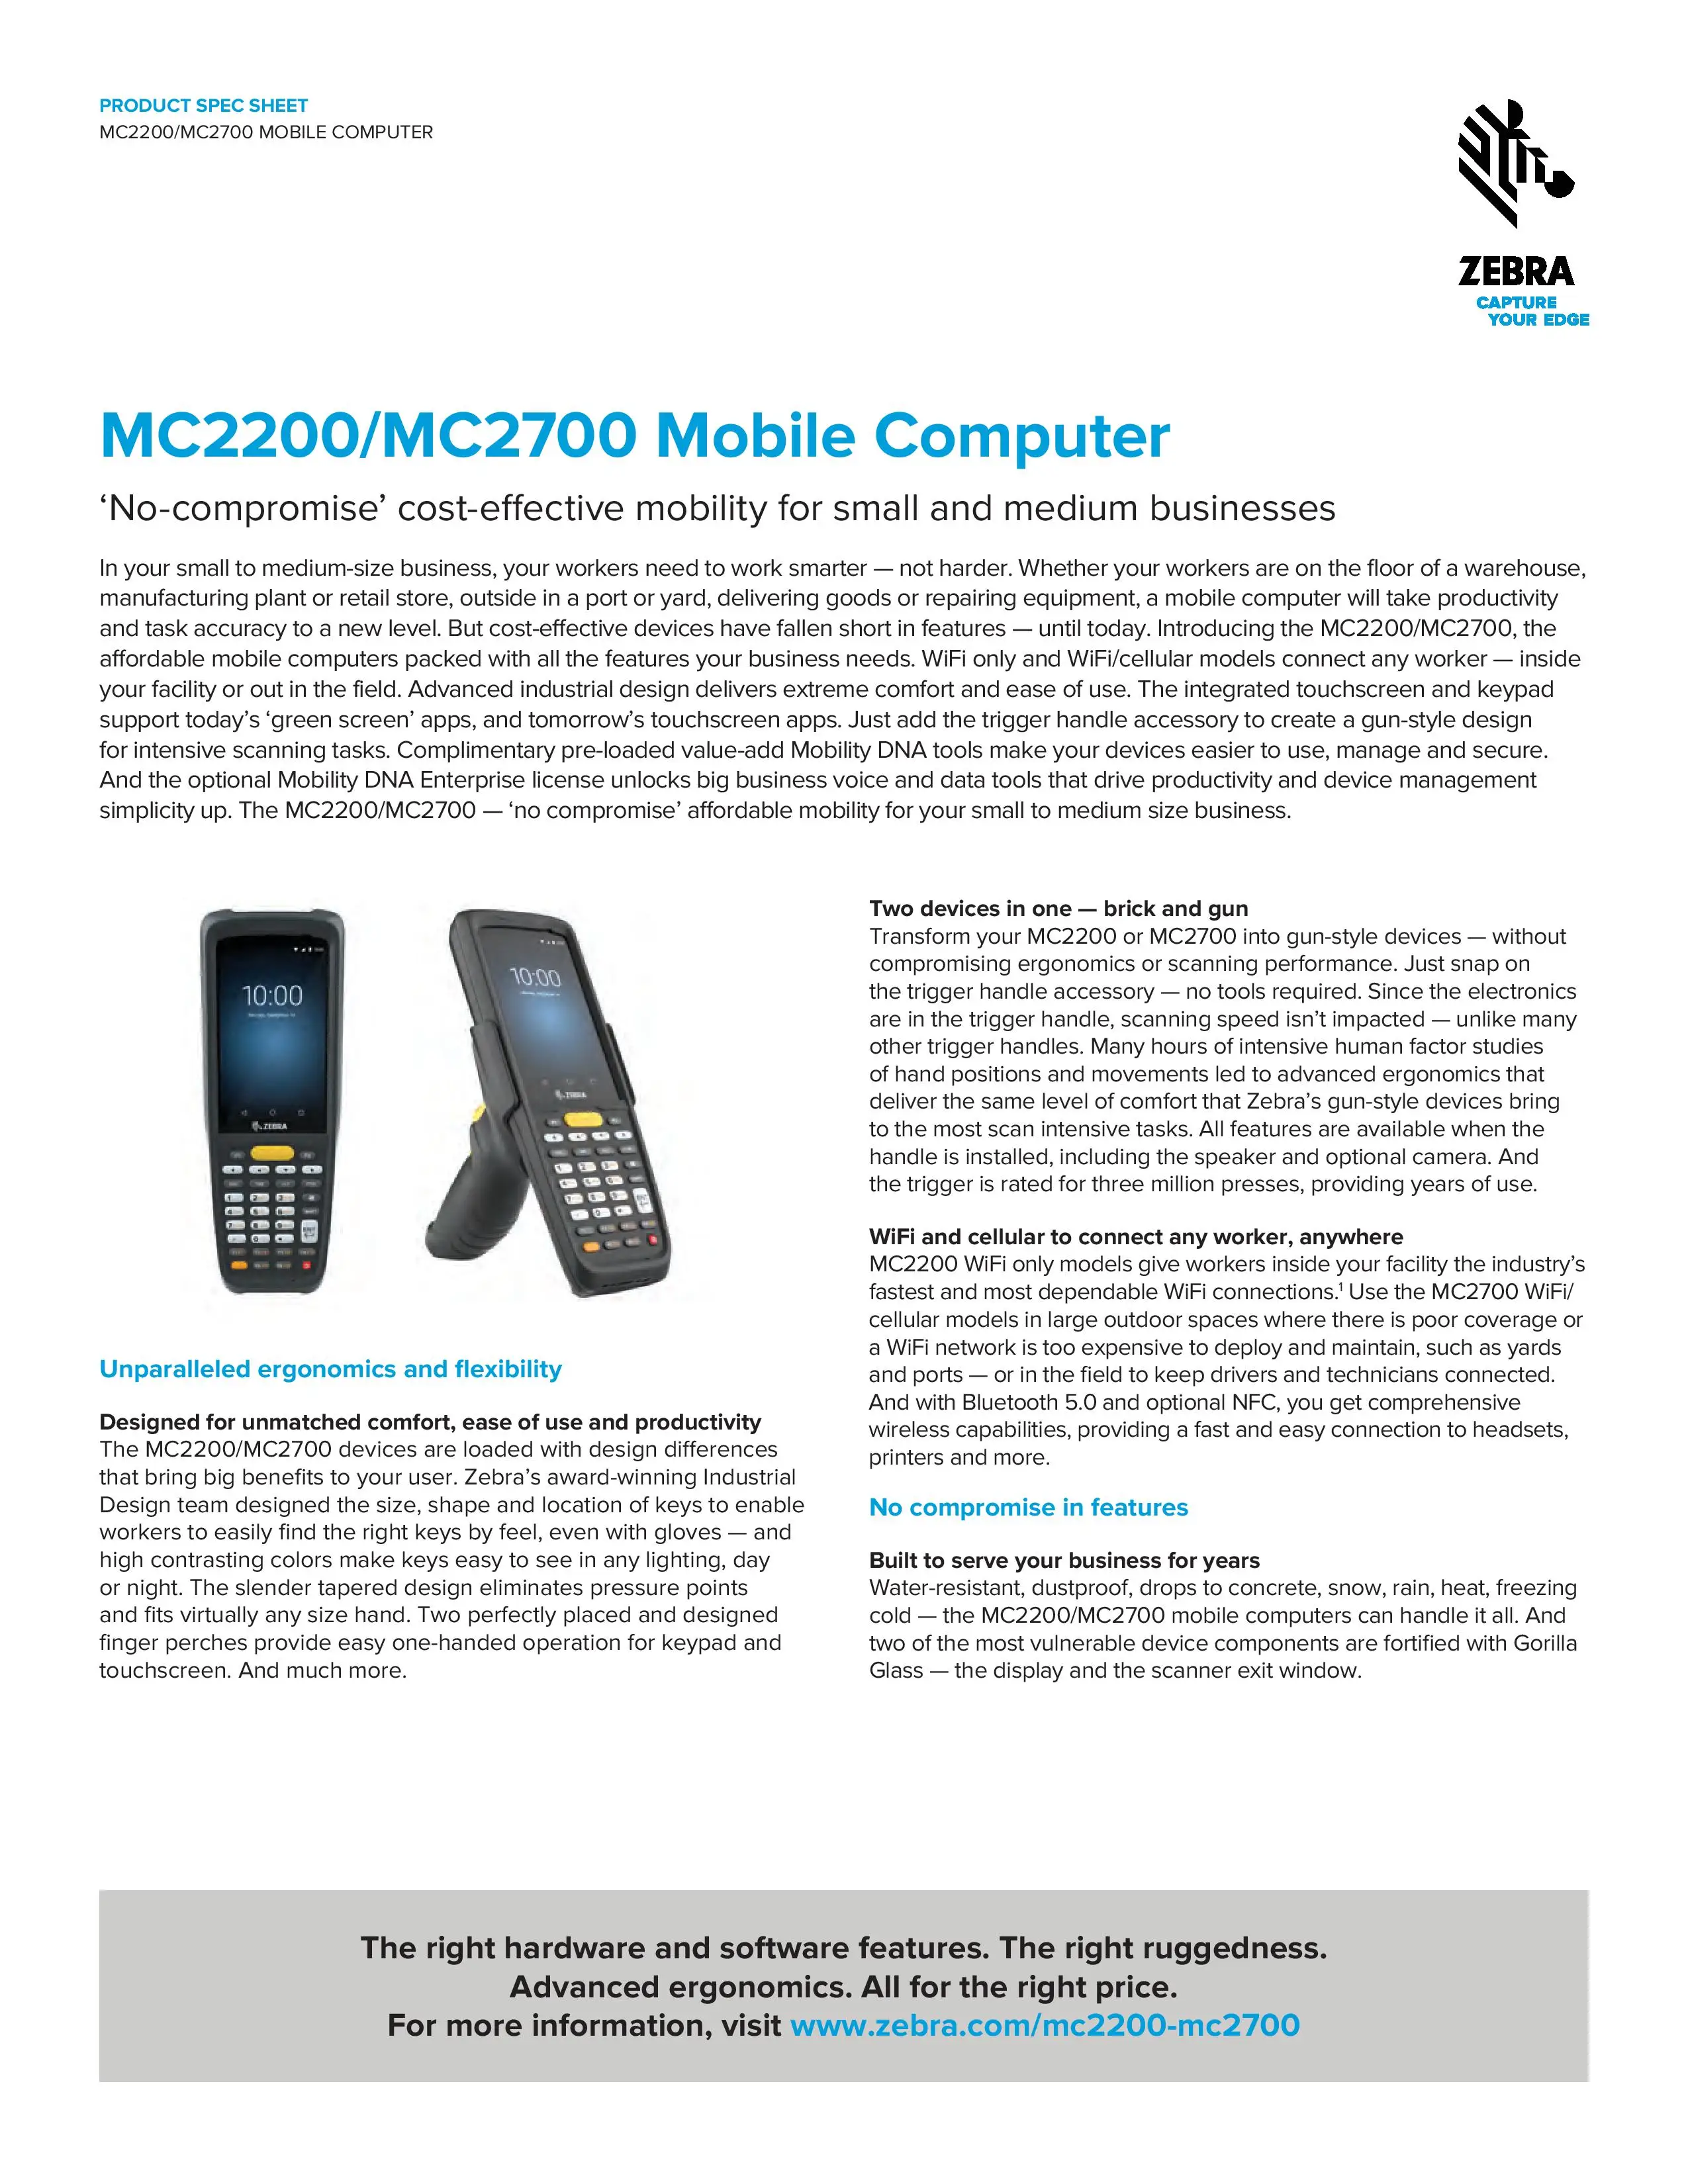 Zebra Mc2200 Mobile Computers For Small And Medium Sized Businesses Buy Rugged Barcode 9735